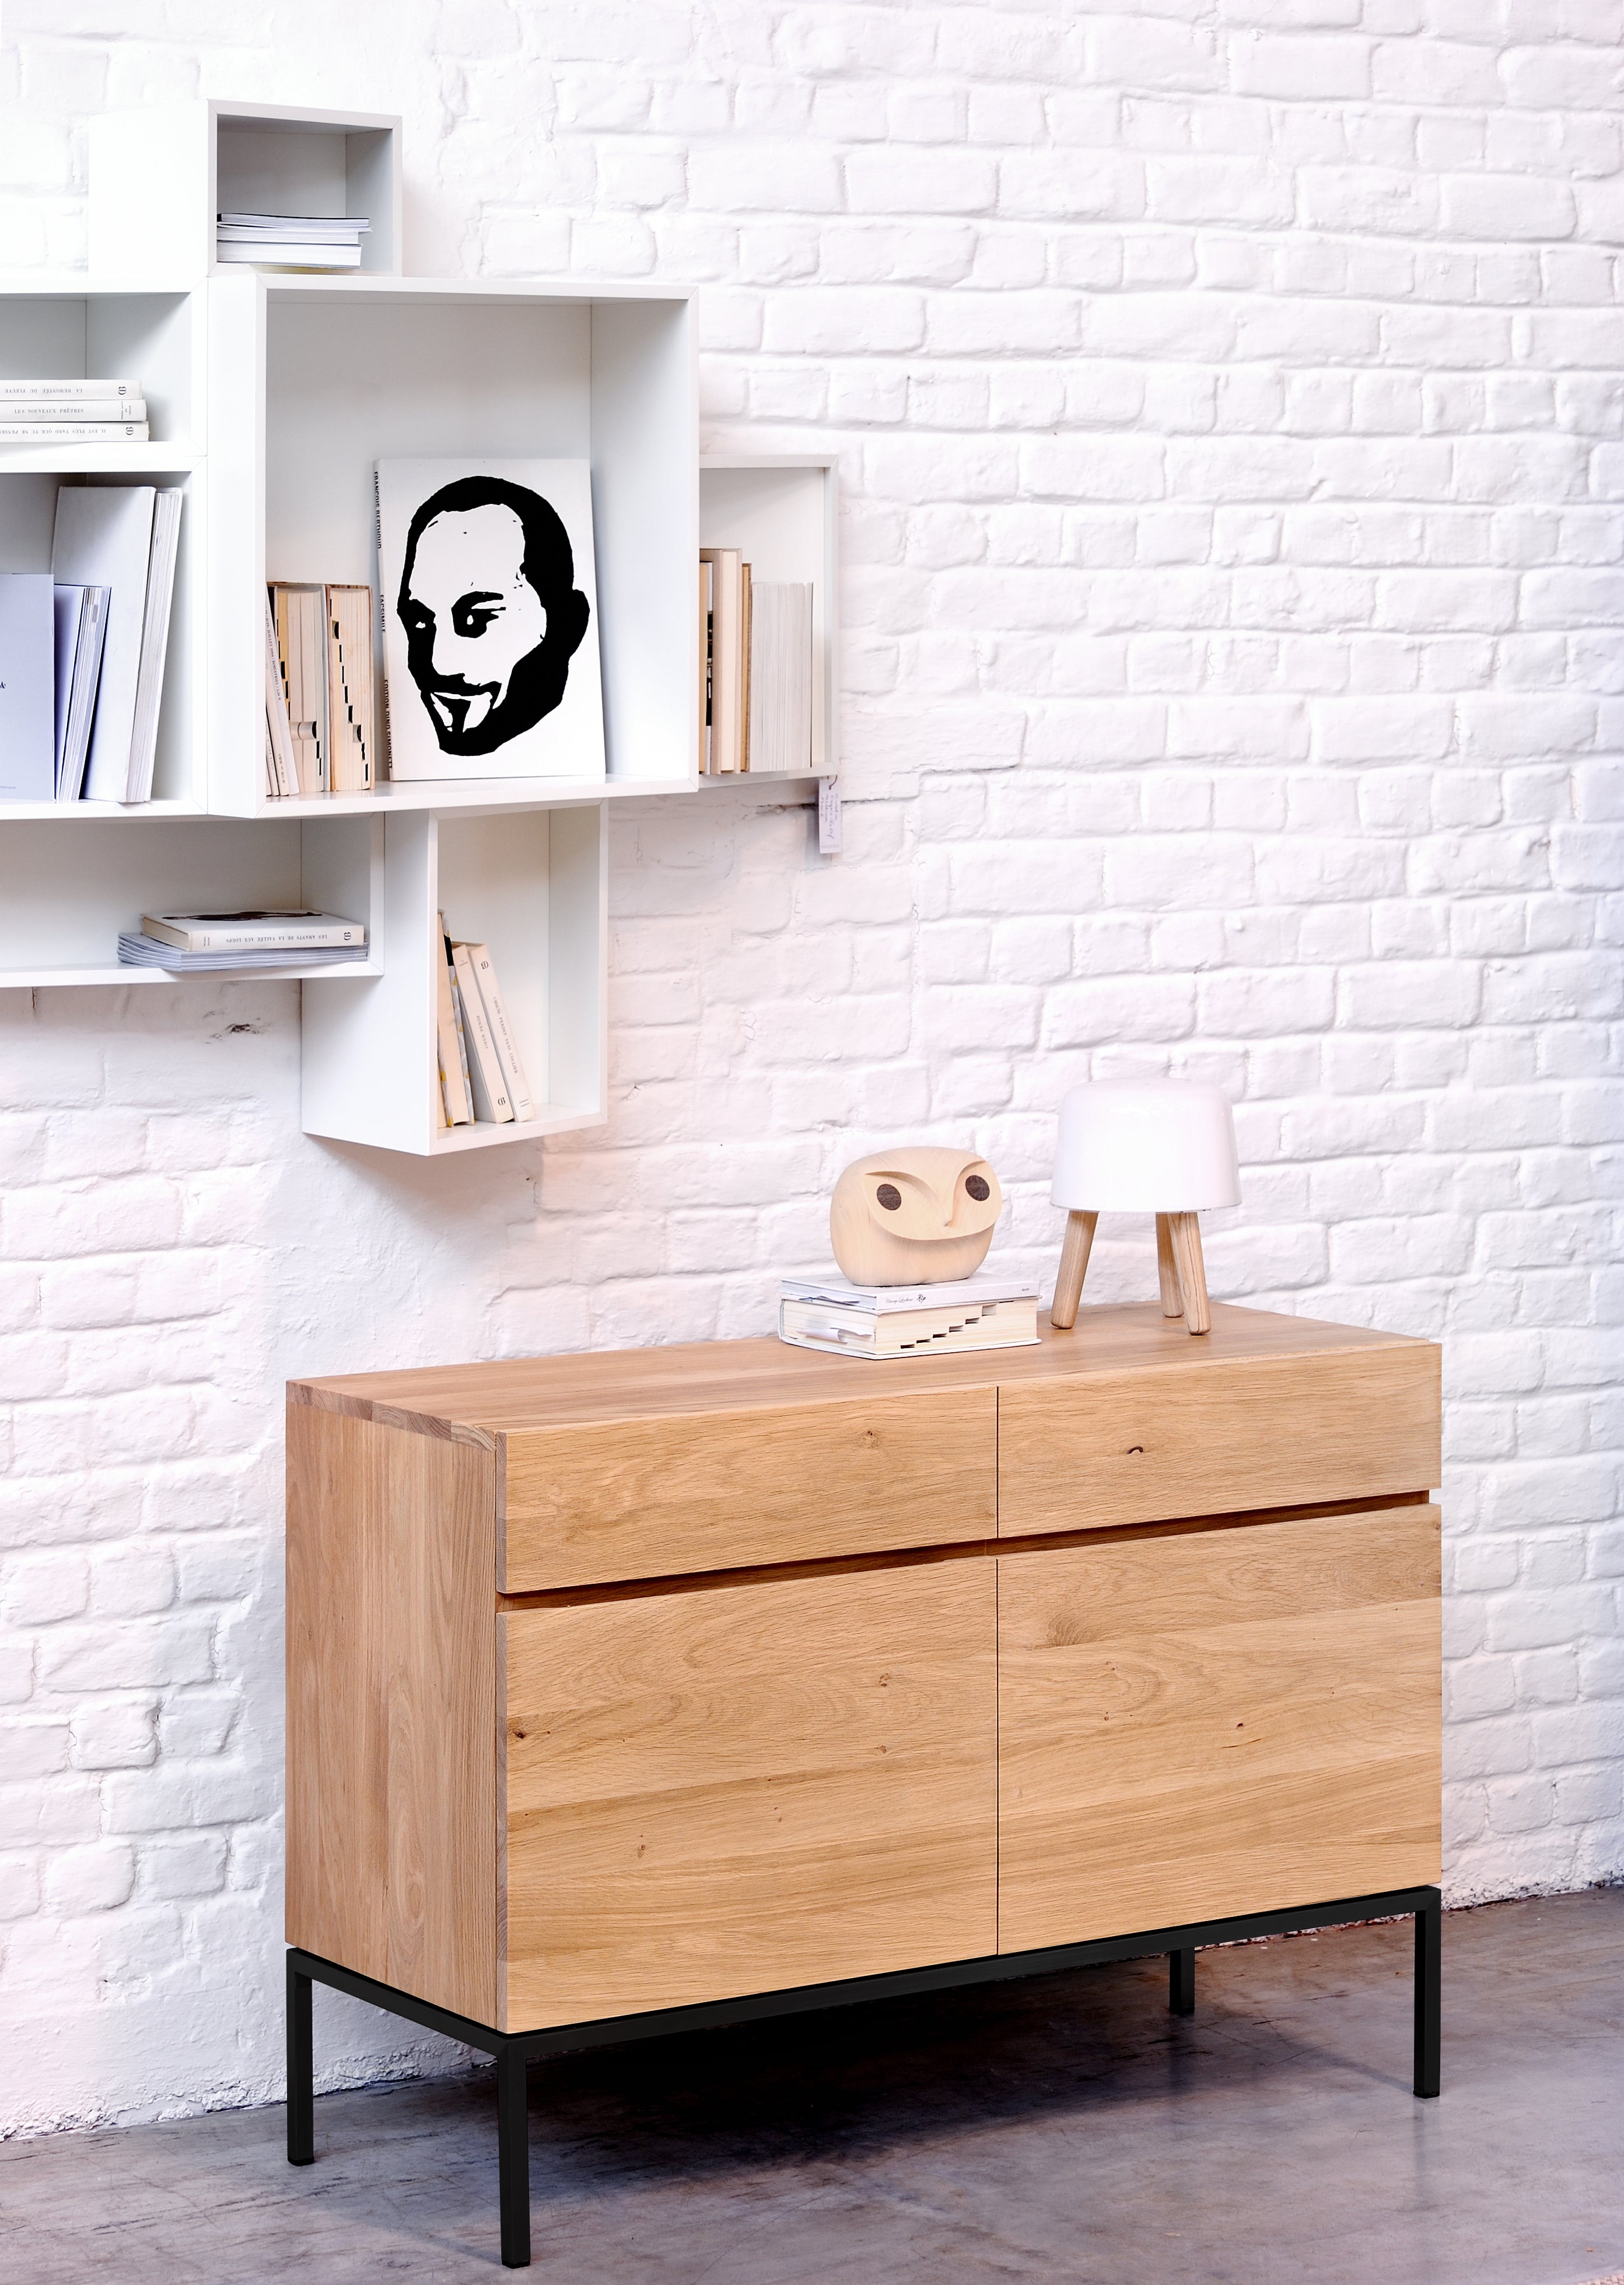 ligna sideboard by ethnicraft at adorn.house